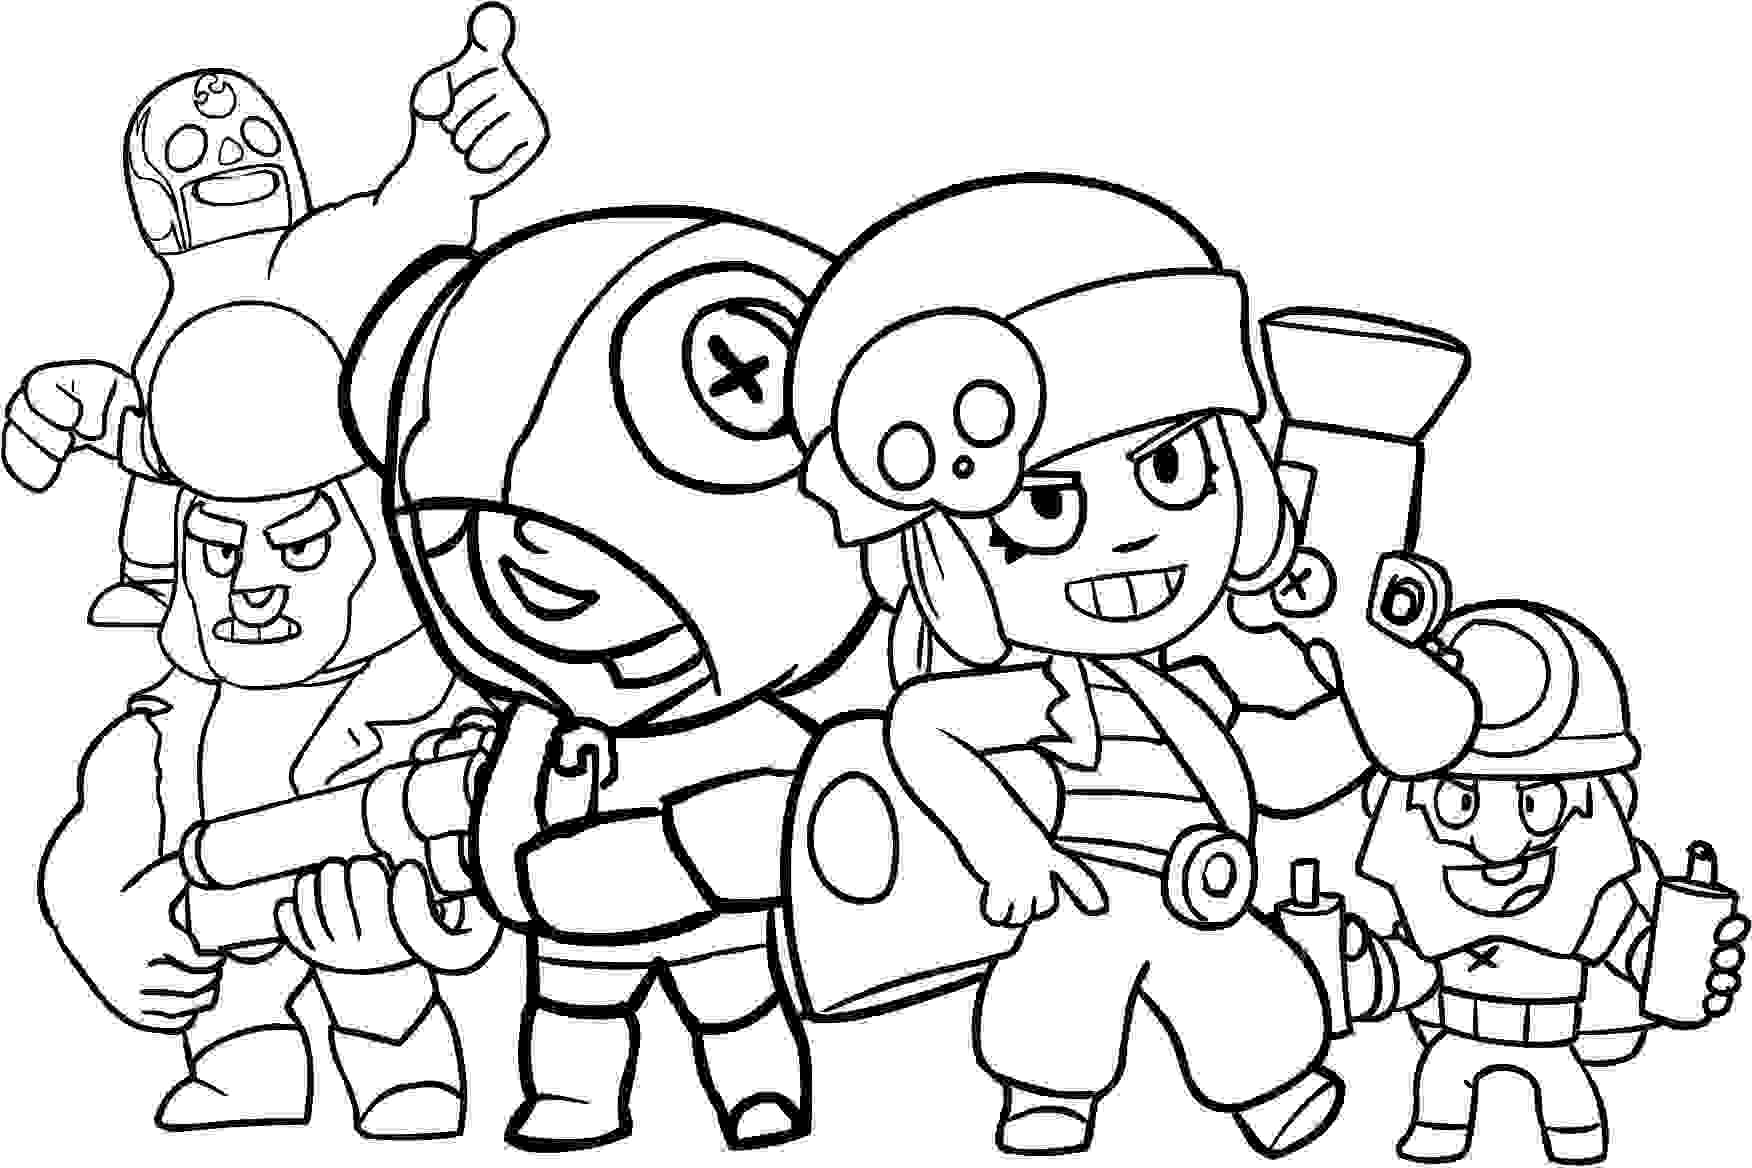 Brawl Stars Characters Dynamike Leon Penny El Primo And Bull Coloring Pages Brawl Stars Coloring Pages Coloring Pages For Kids And Adults - brawl stars penny coloring pages